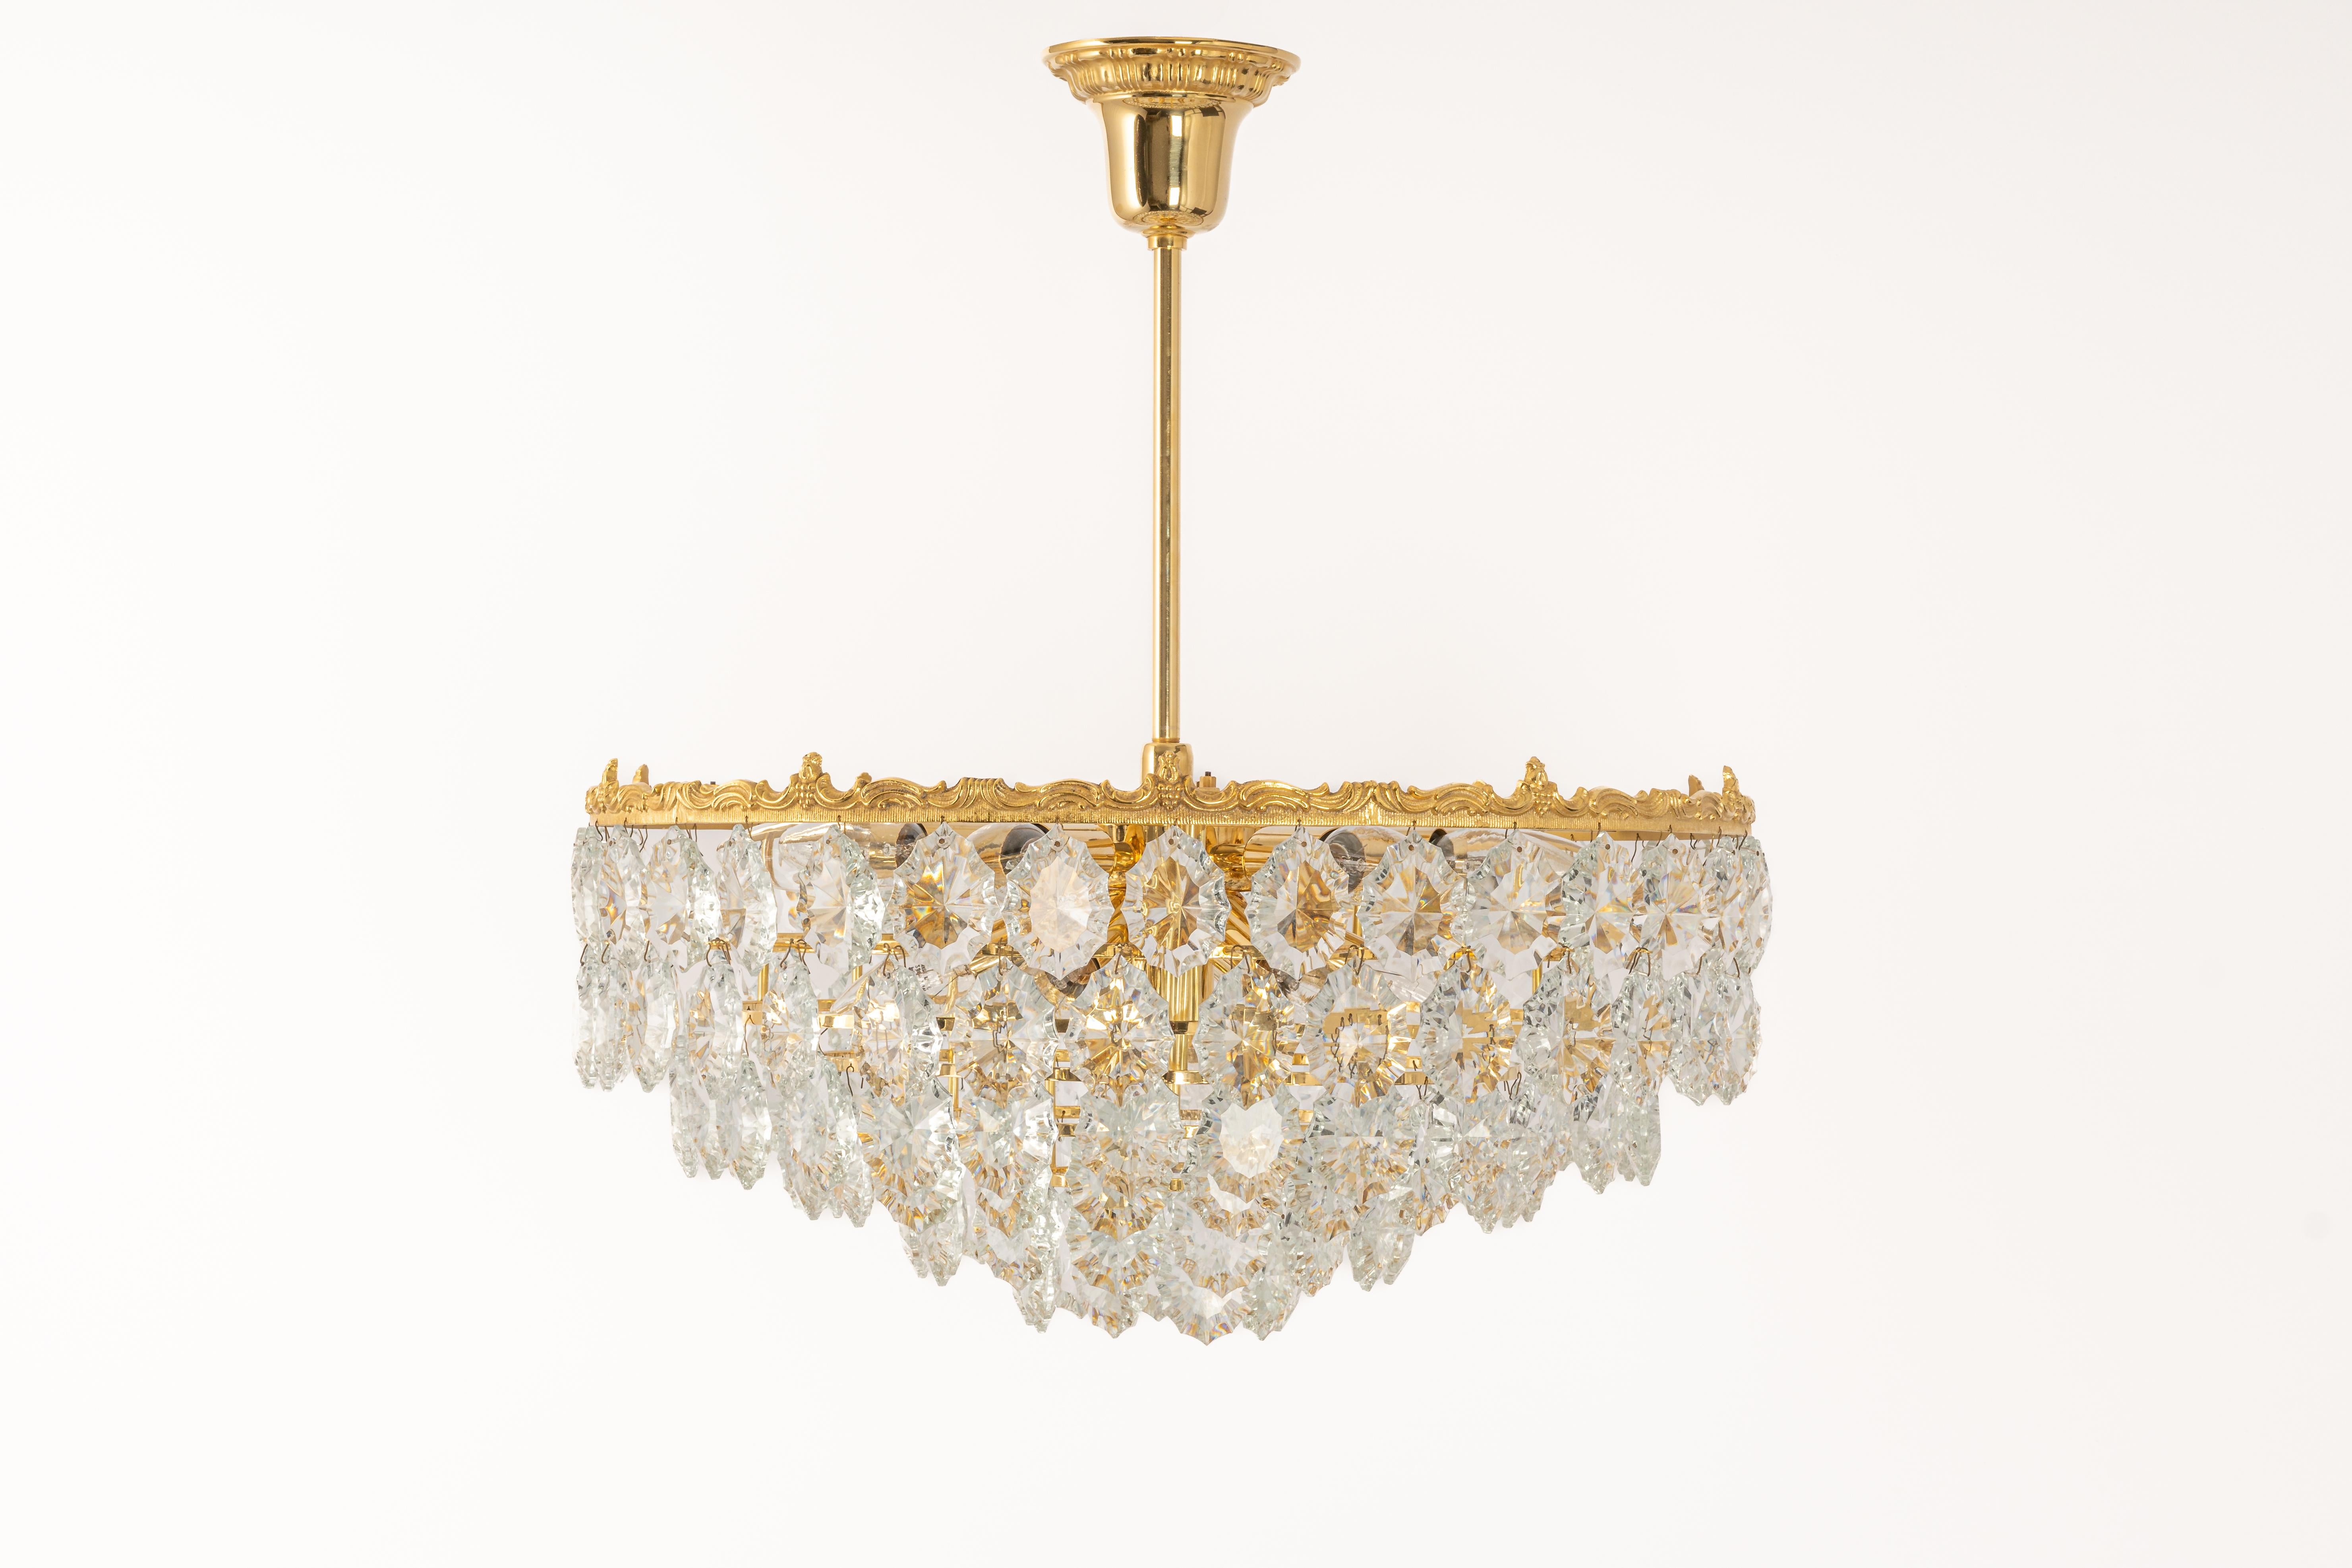 A stunning six-tier chandelier by Bakalowits & Sohne, Austria, manufactured in circa 1960-1969. A handmade and high-quality piece. The ceiling fixture and the frame are made of gilt brass and have six rings with lots of facetted crystal glass